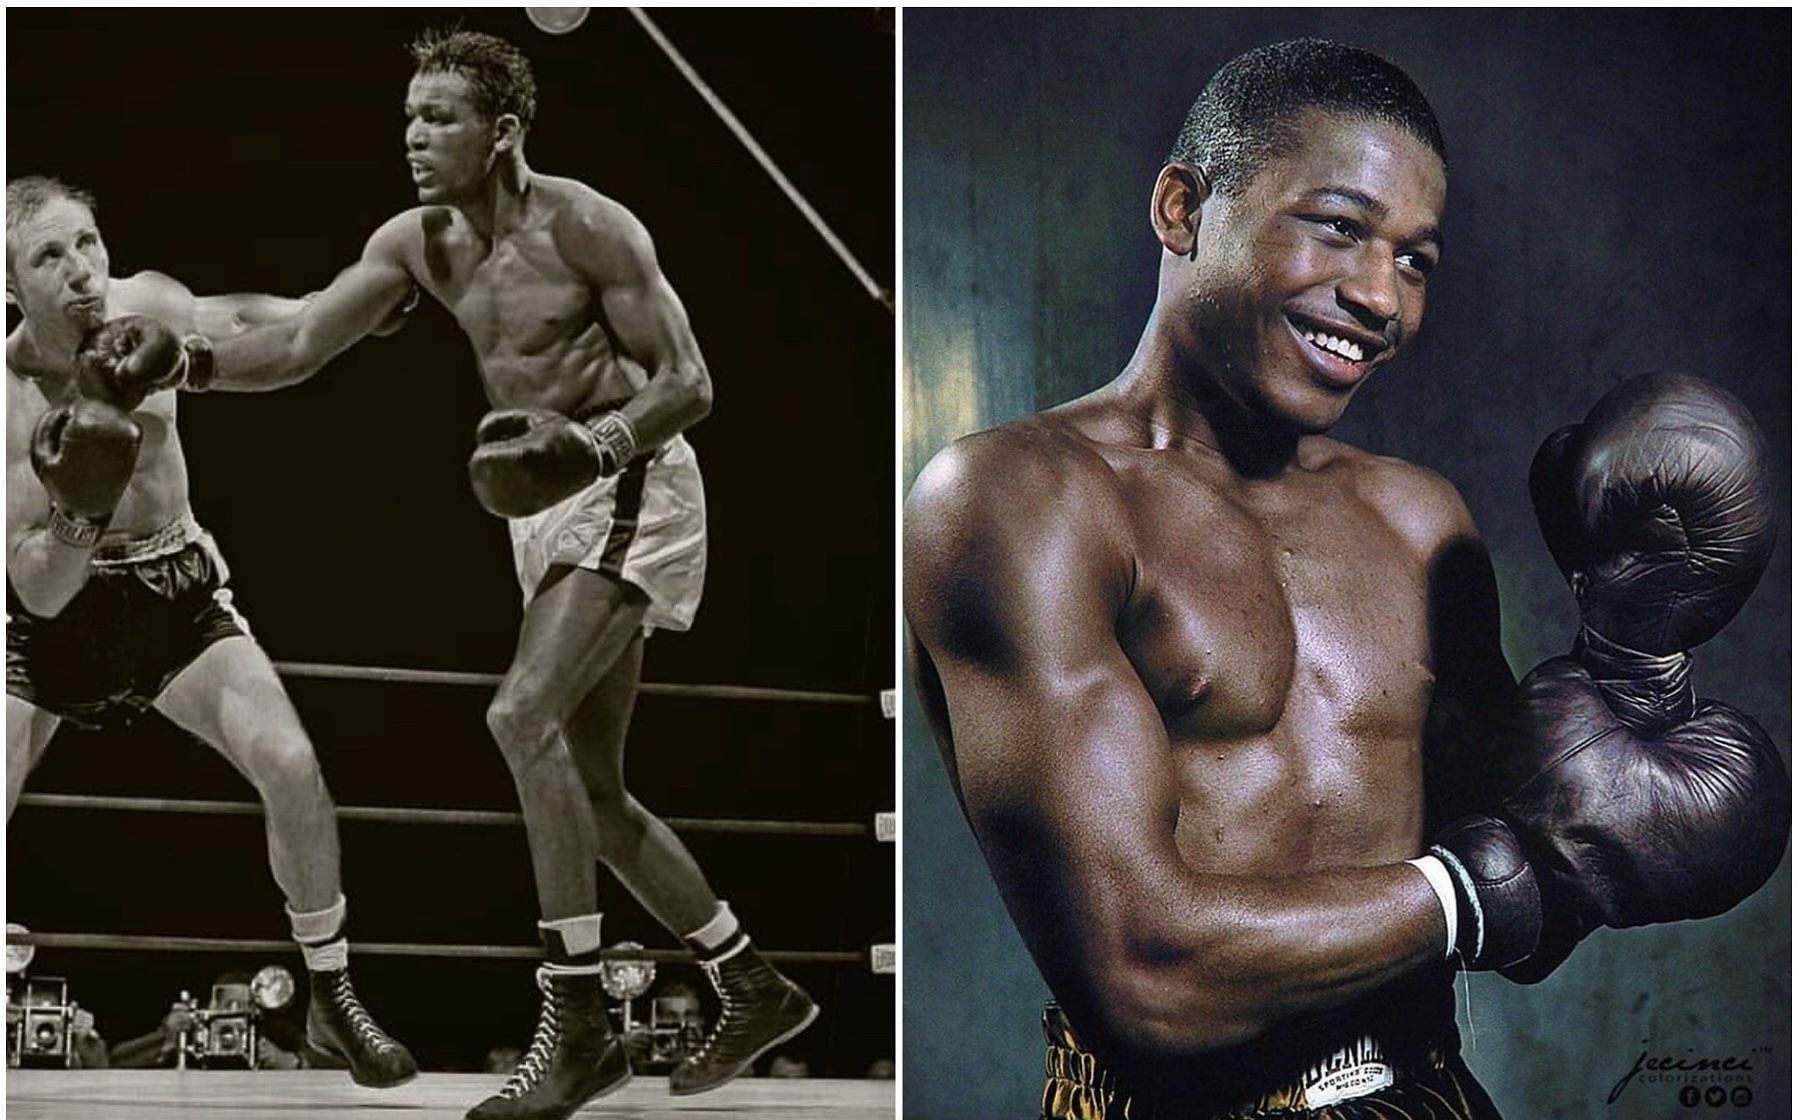 Sugar Ray Robinson - Images via @thyssterboxing and @hisorycolored on Instagram